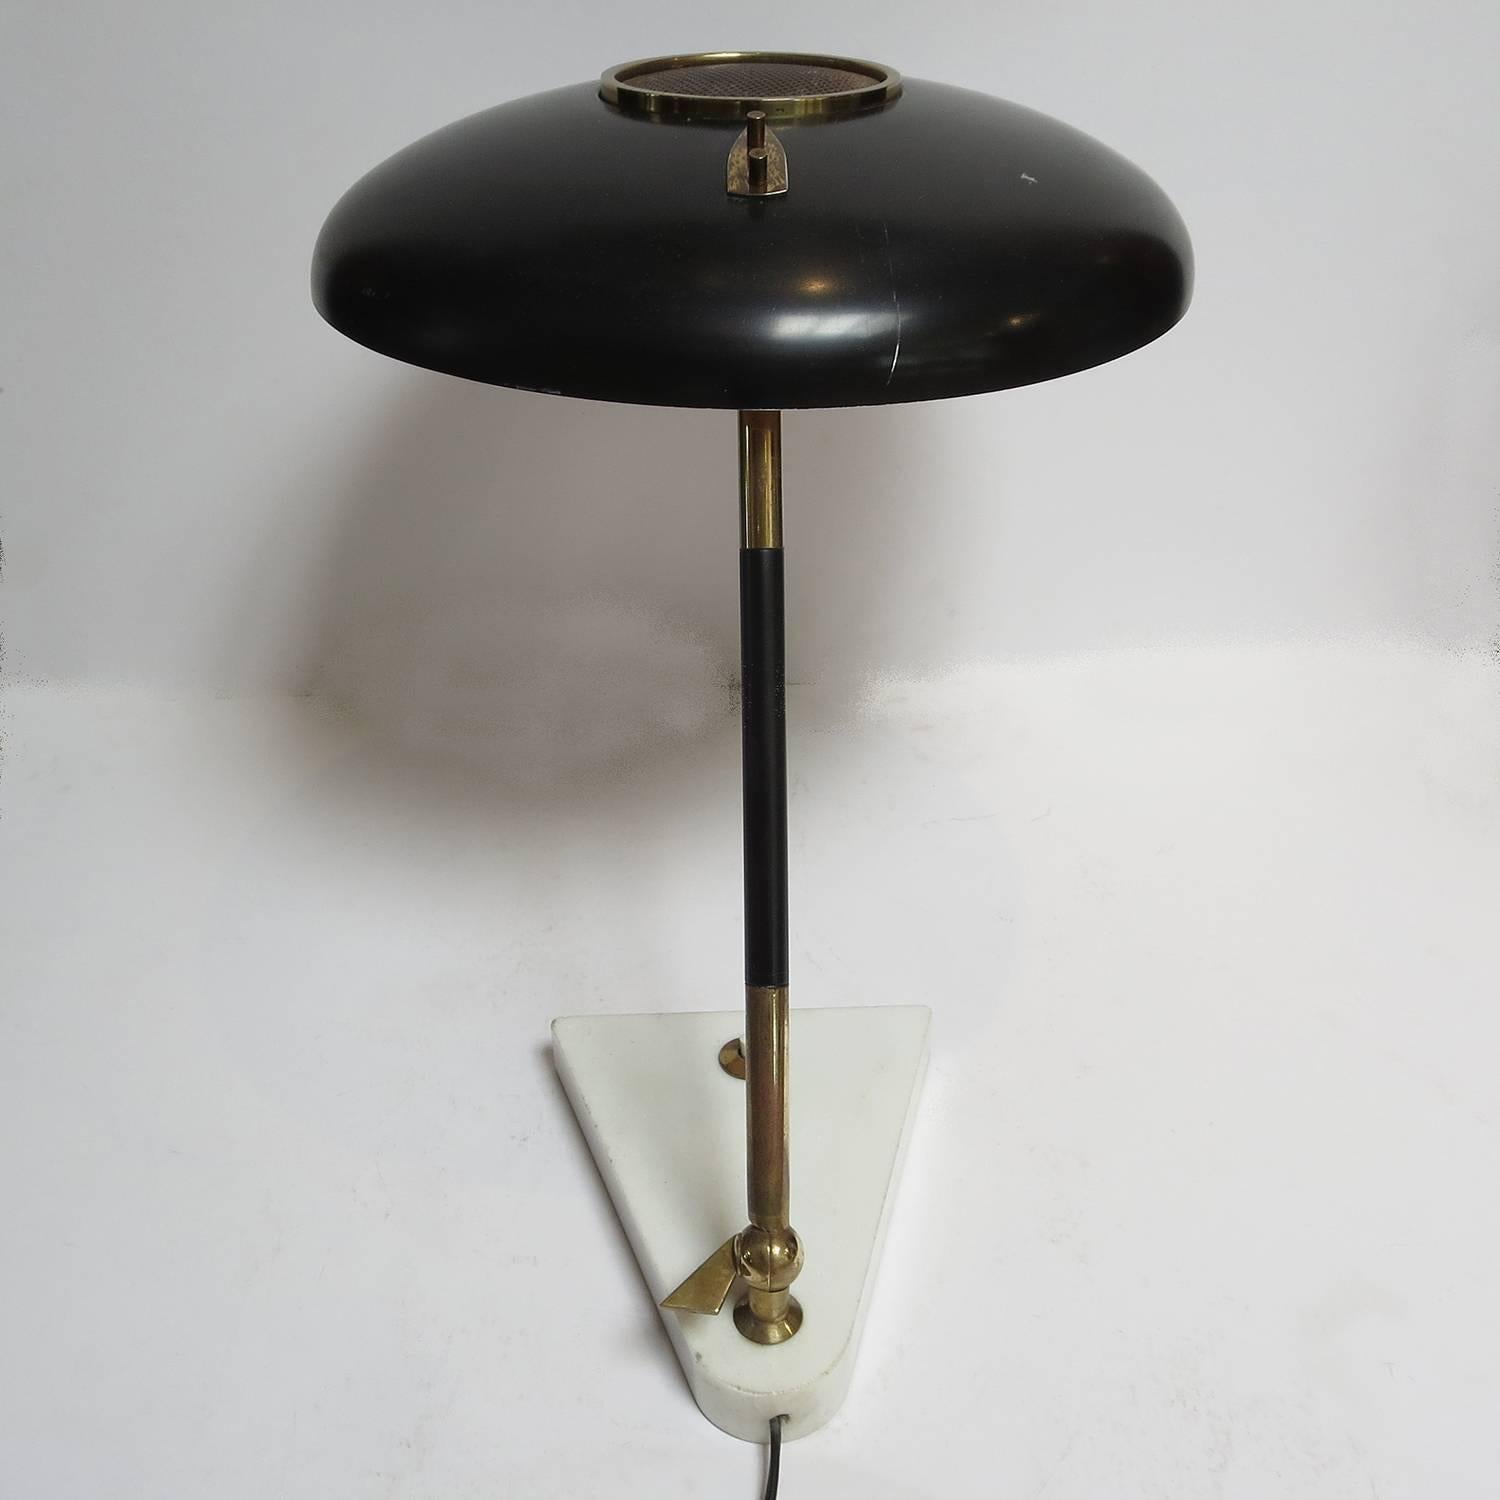 Fine and rare example of Oscar Torlasco's desk lamp for Lumi of Italy. The lamp is in nice working original condition. There are a few minor scratches to the paint on the shade, but we have opted to leave as original. However, we will be happy to